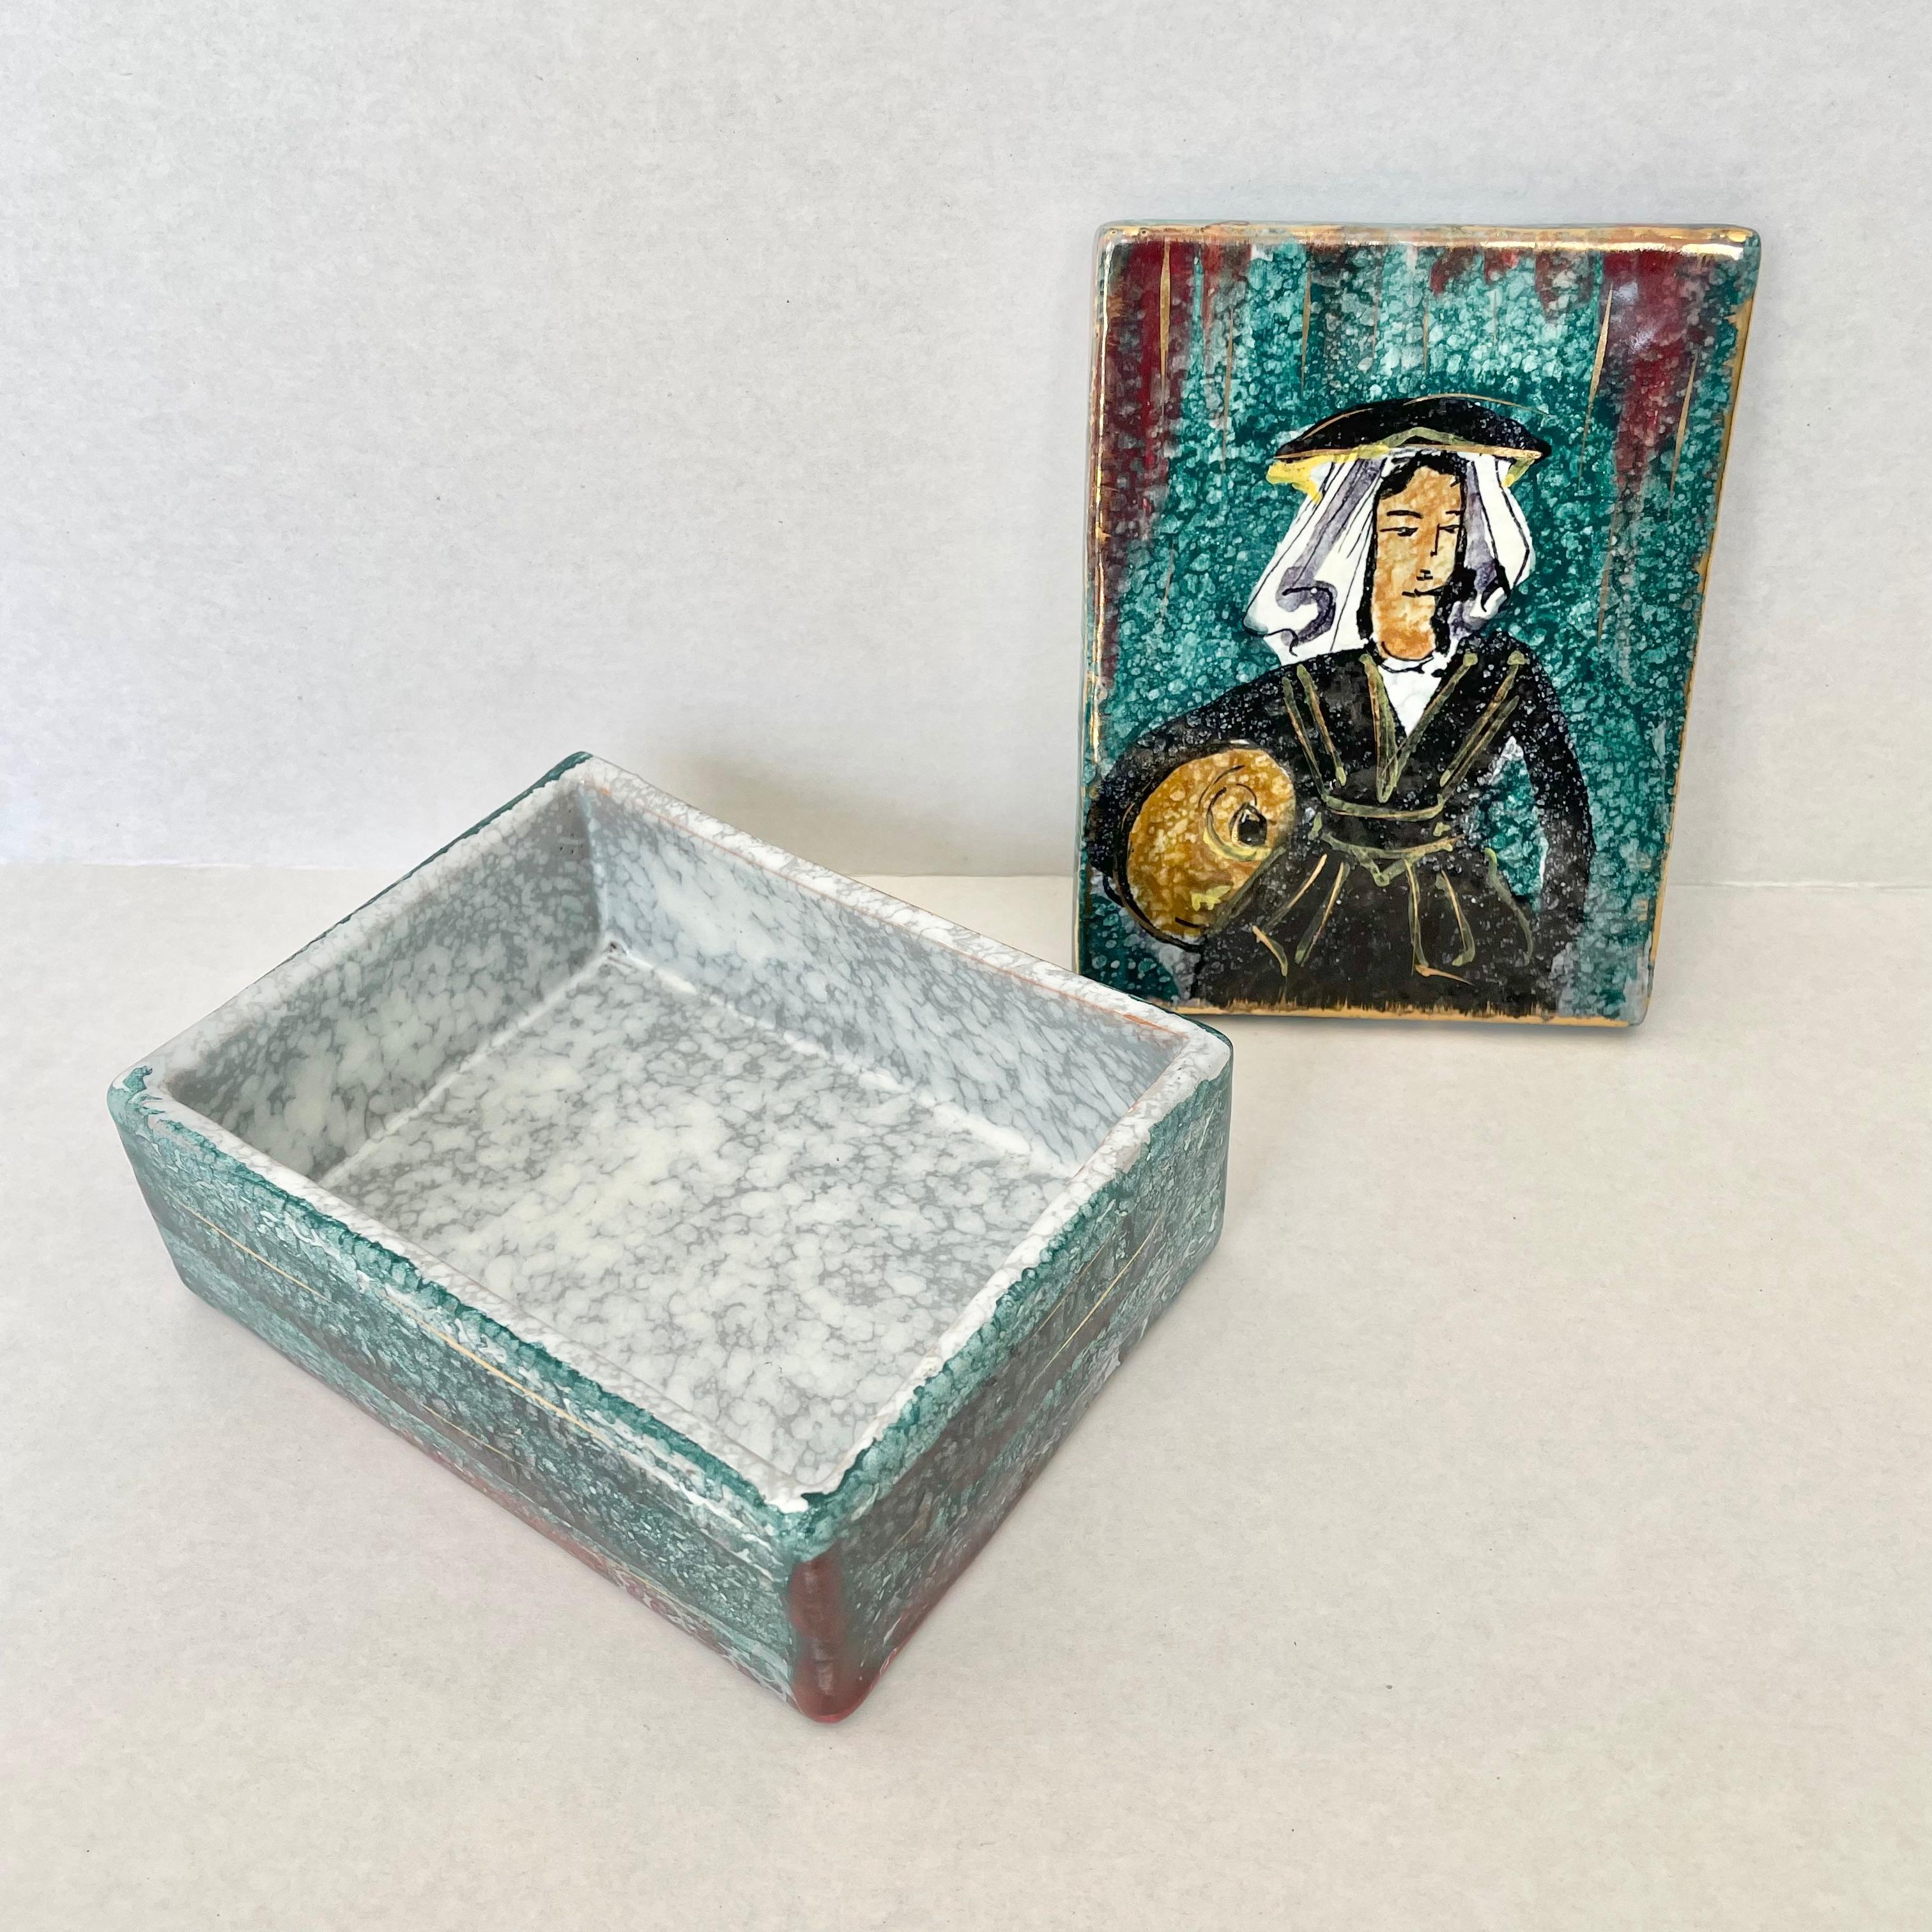 Artistic glazed ceramic box made in Italy, circa 1970s. Beautiful painting of woman in a black robe and hat with a white sun cover. Accent hues of maroon, gold and green throughout. Great vintage condition. Fun stash box and tabletop object. Marked